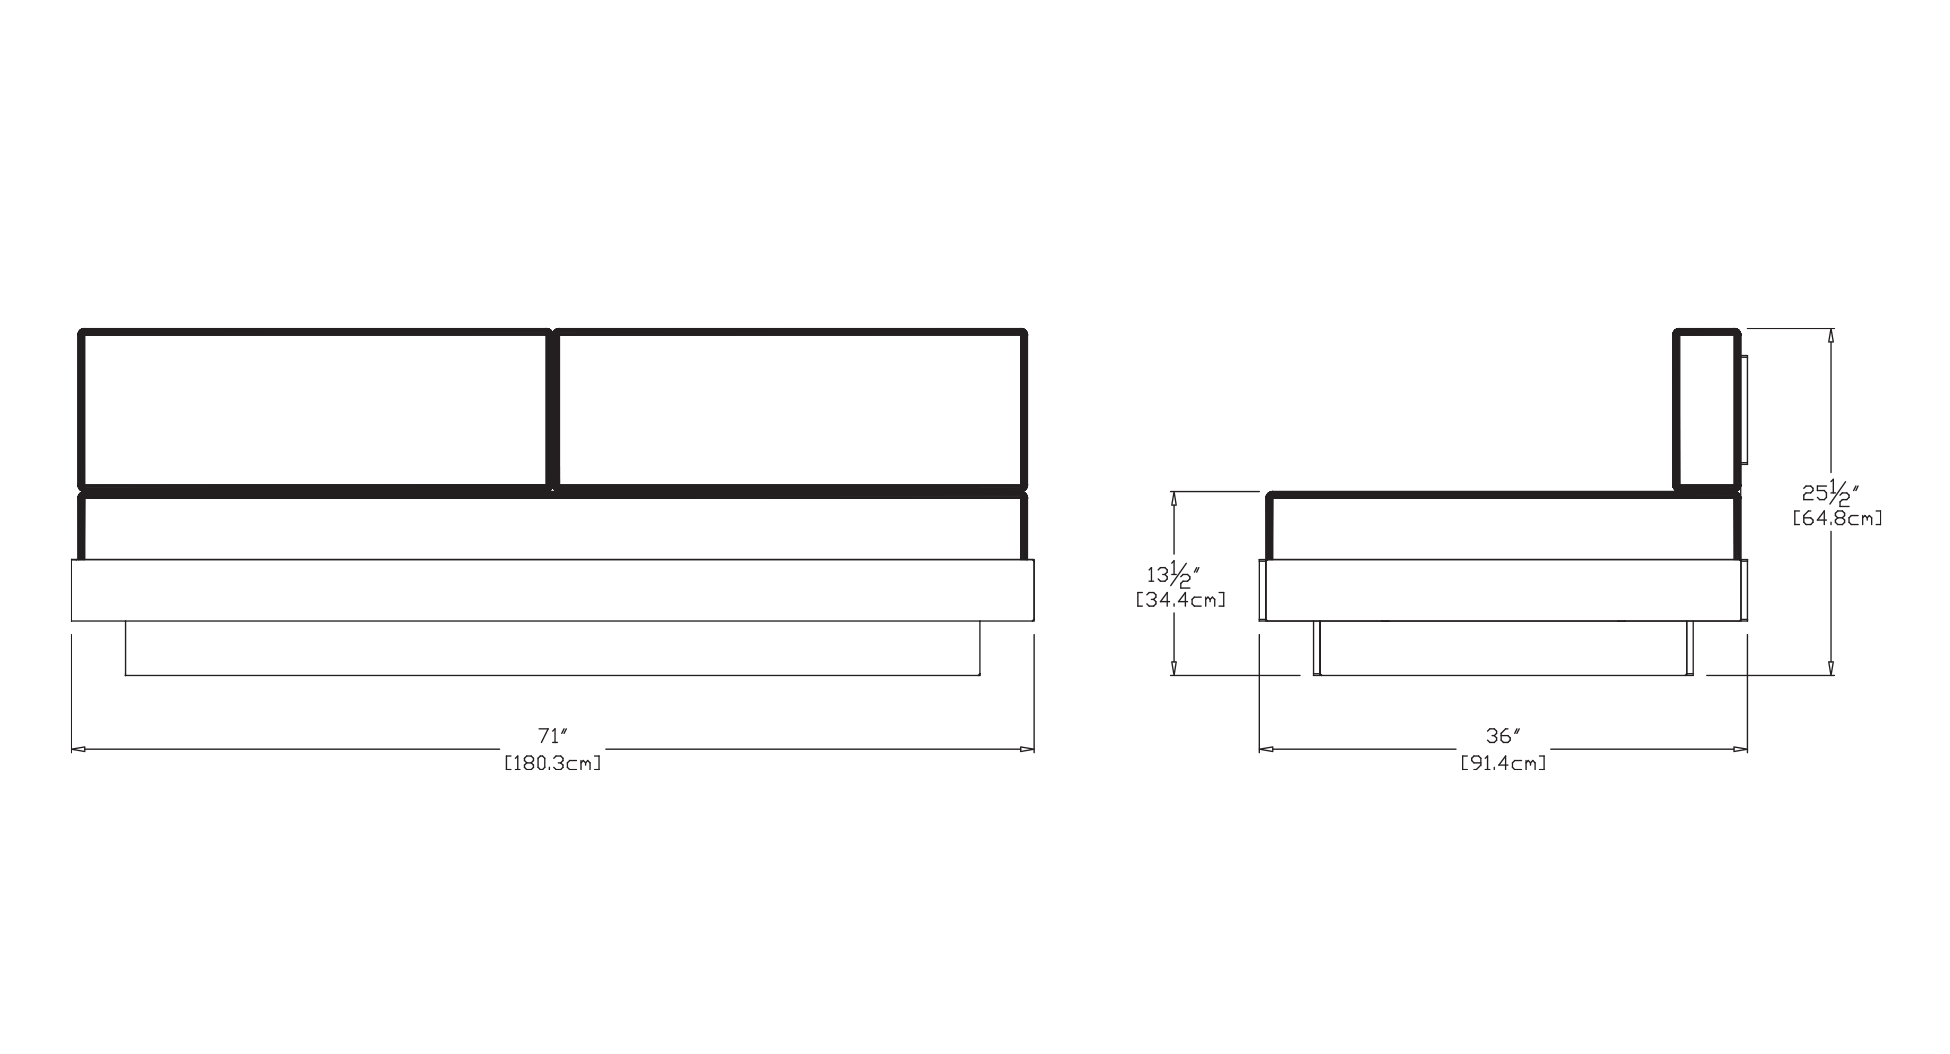 Platform One Sectional Sofa Dimensions